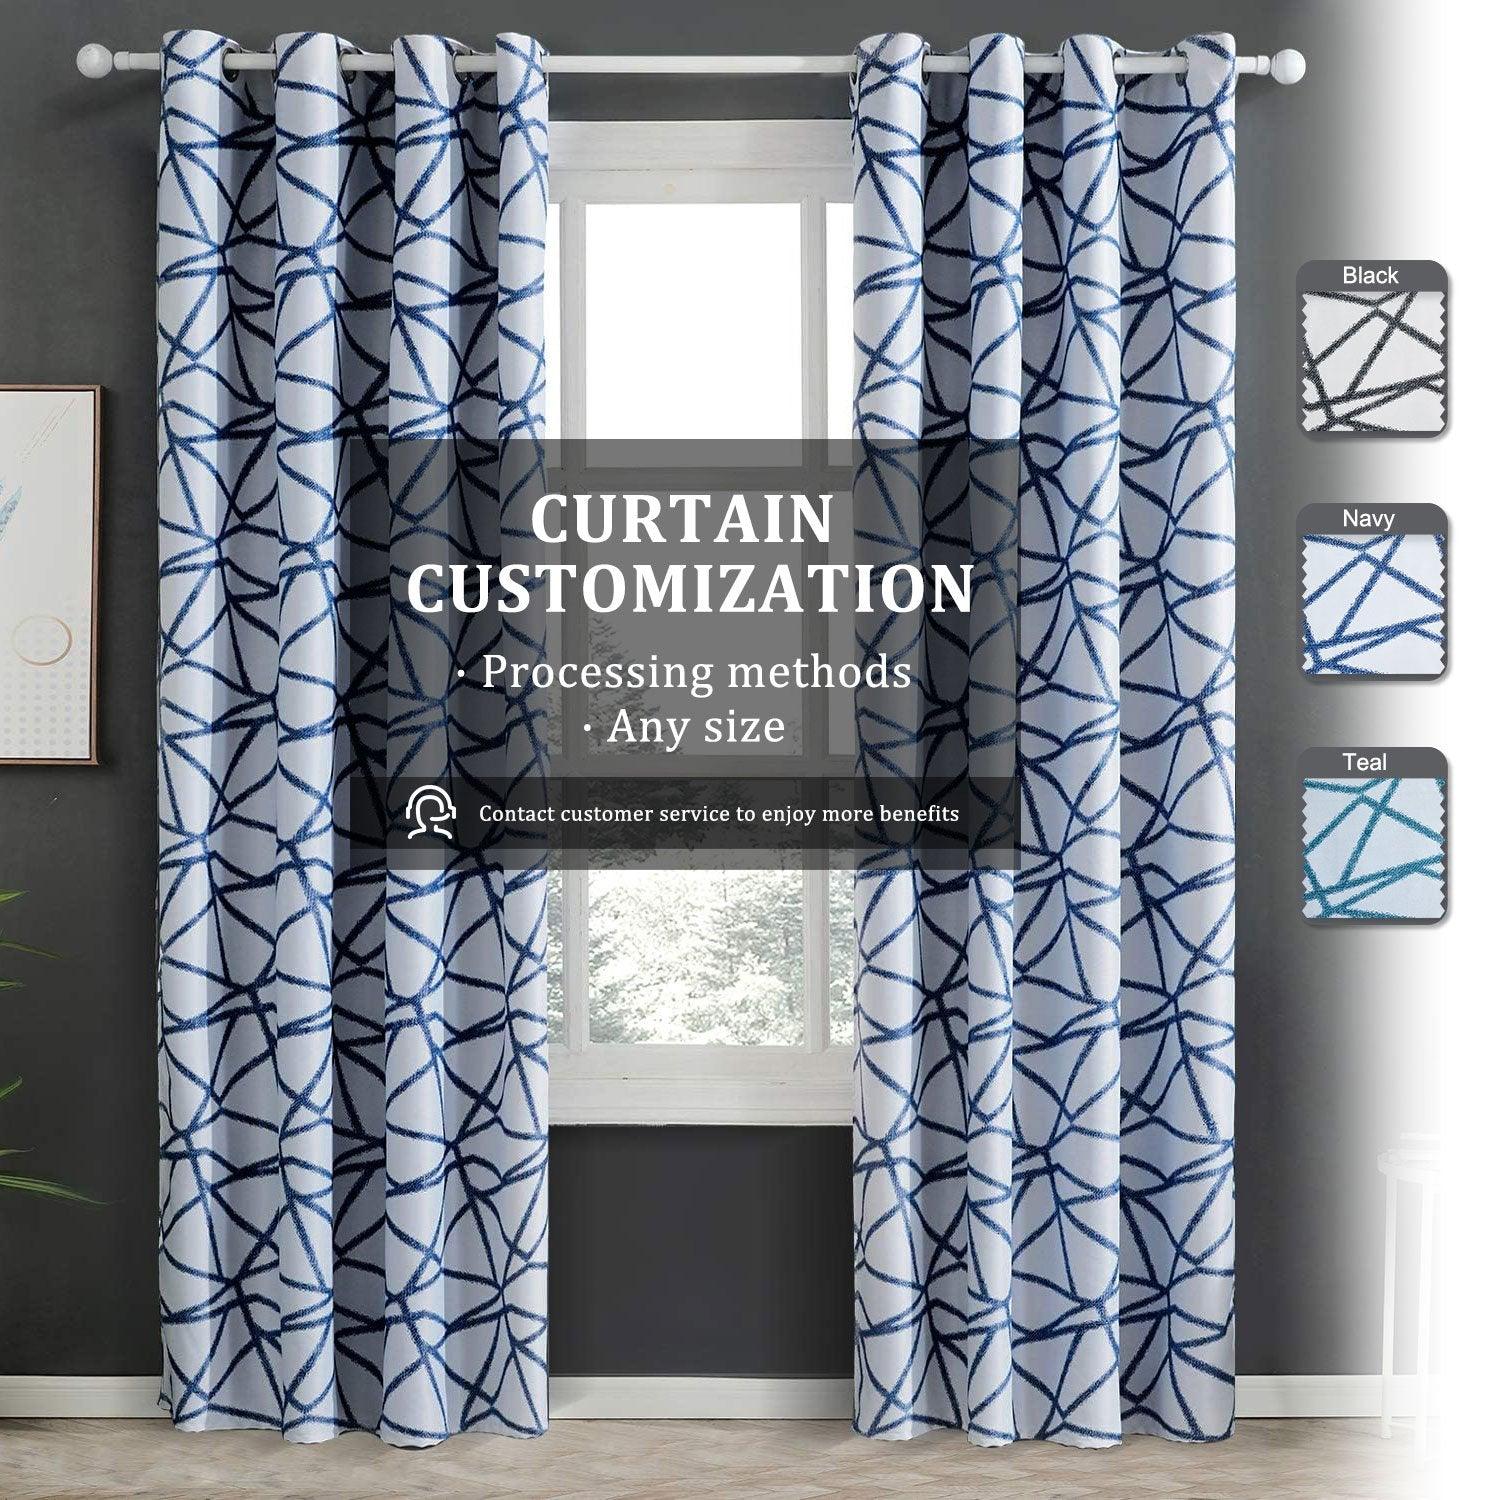 Diy Curtains - Top Printed Blackout Winter Thermal Curtains Perfect For Bedroom,1 Panel - Topfinel